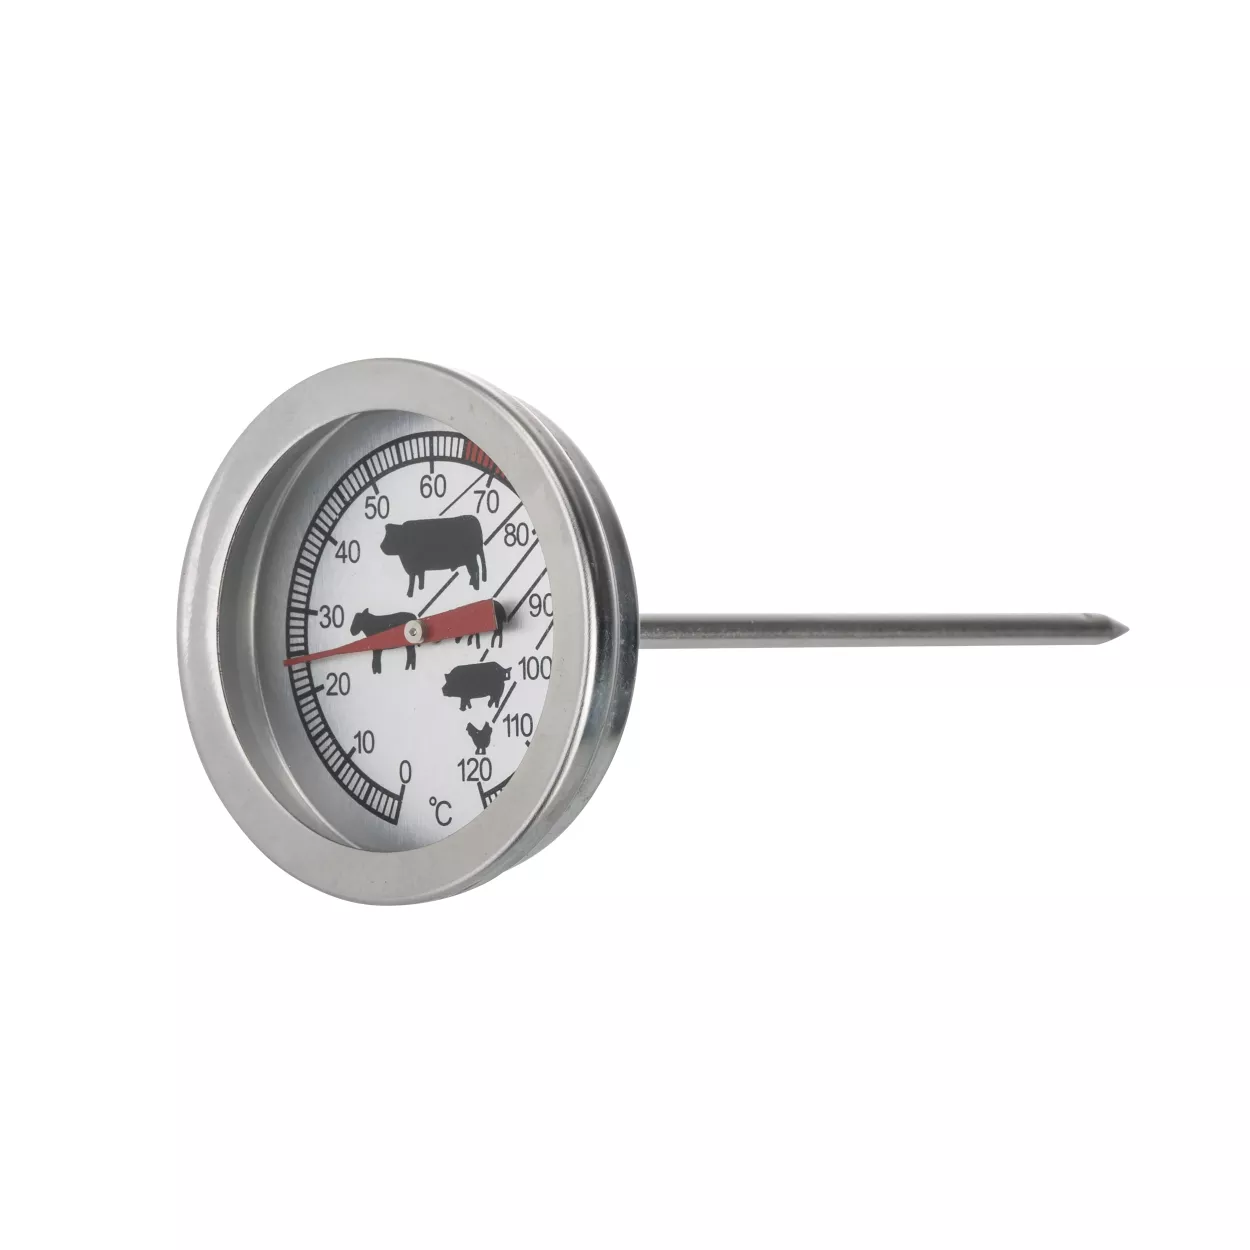 Just The Thing Stainless Steel Meat Thermometer